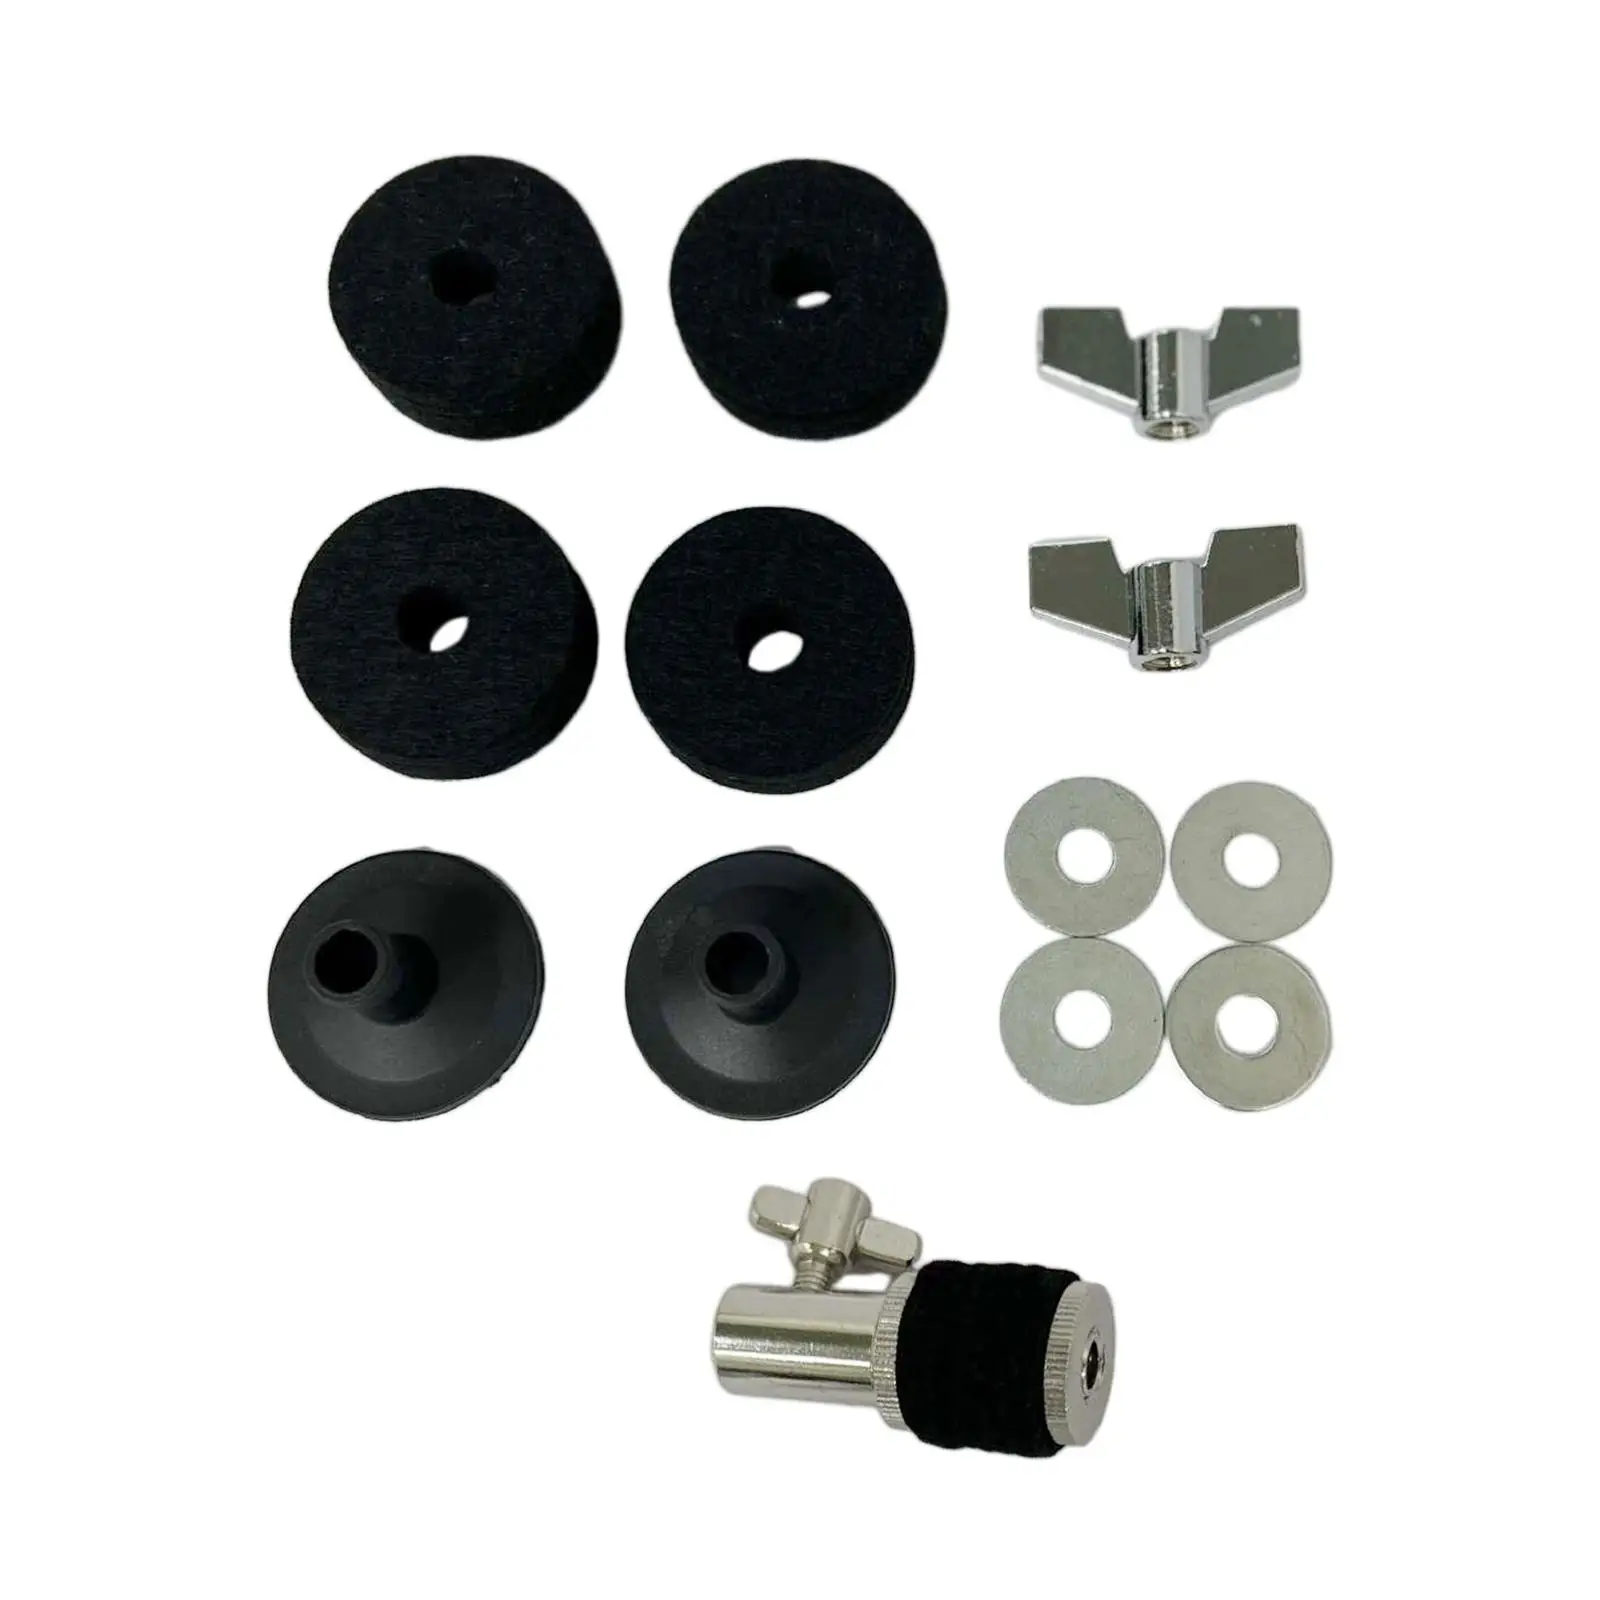 13Pcs Cymbal Replacement Accessories Wing Nuts Felts Drum Hardware Lightweight Cymbal Sleeve for Percussion Instrument Parts